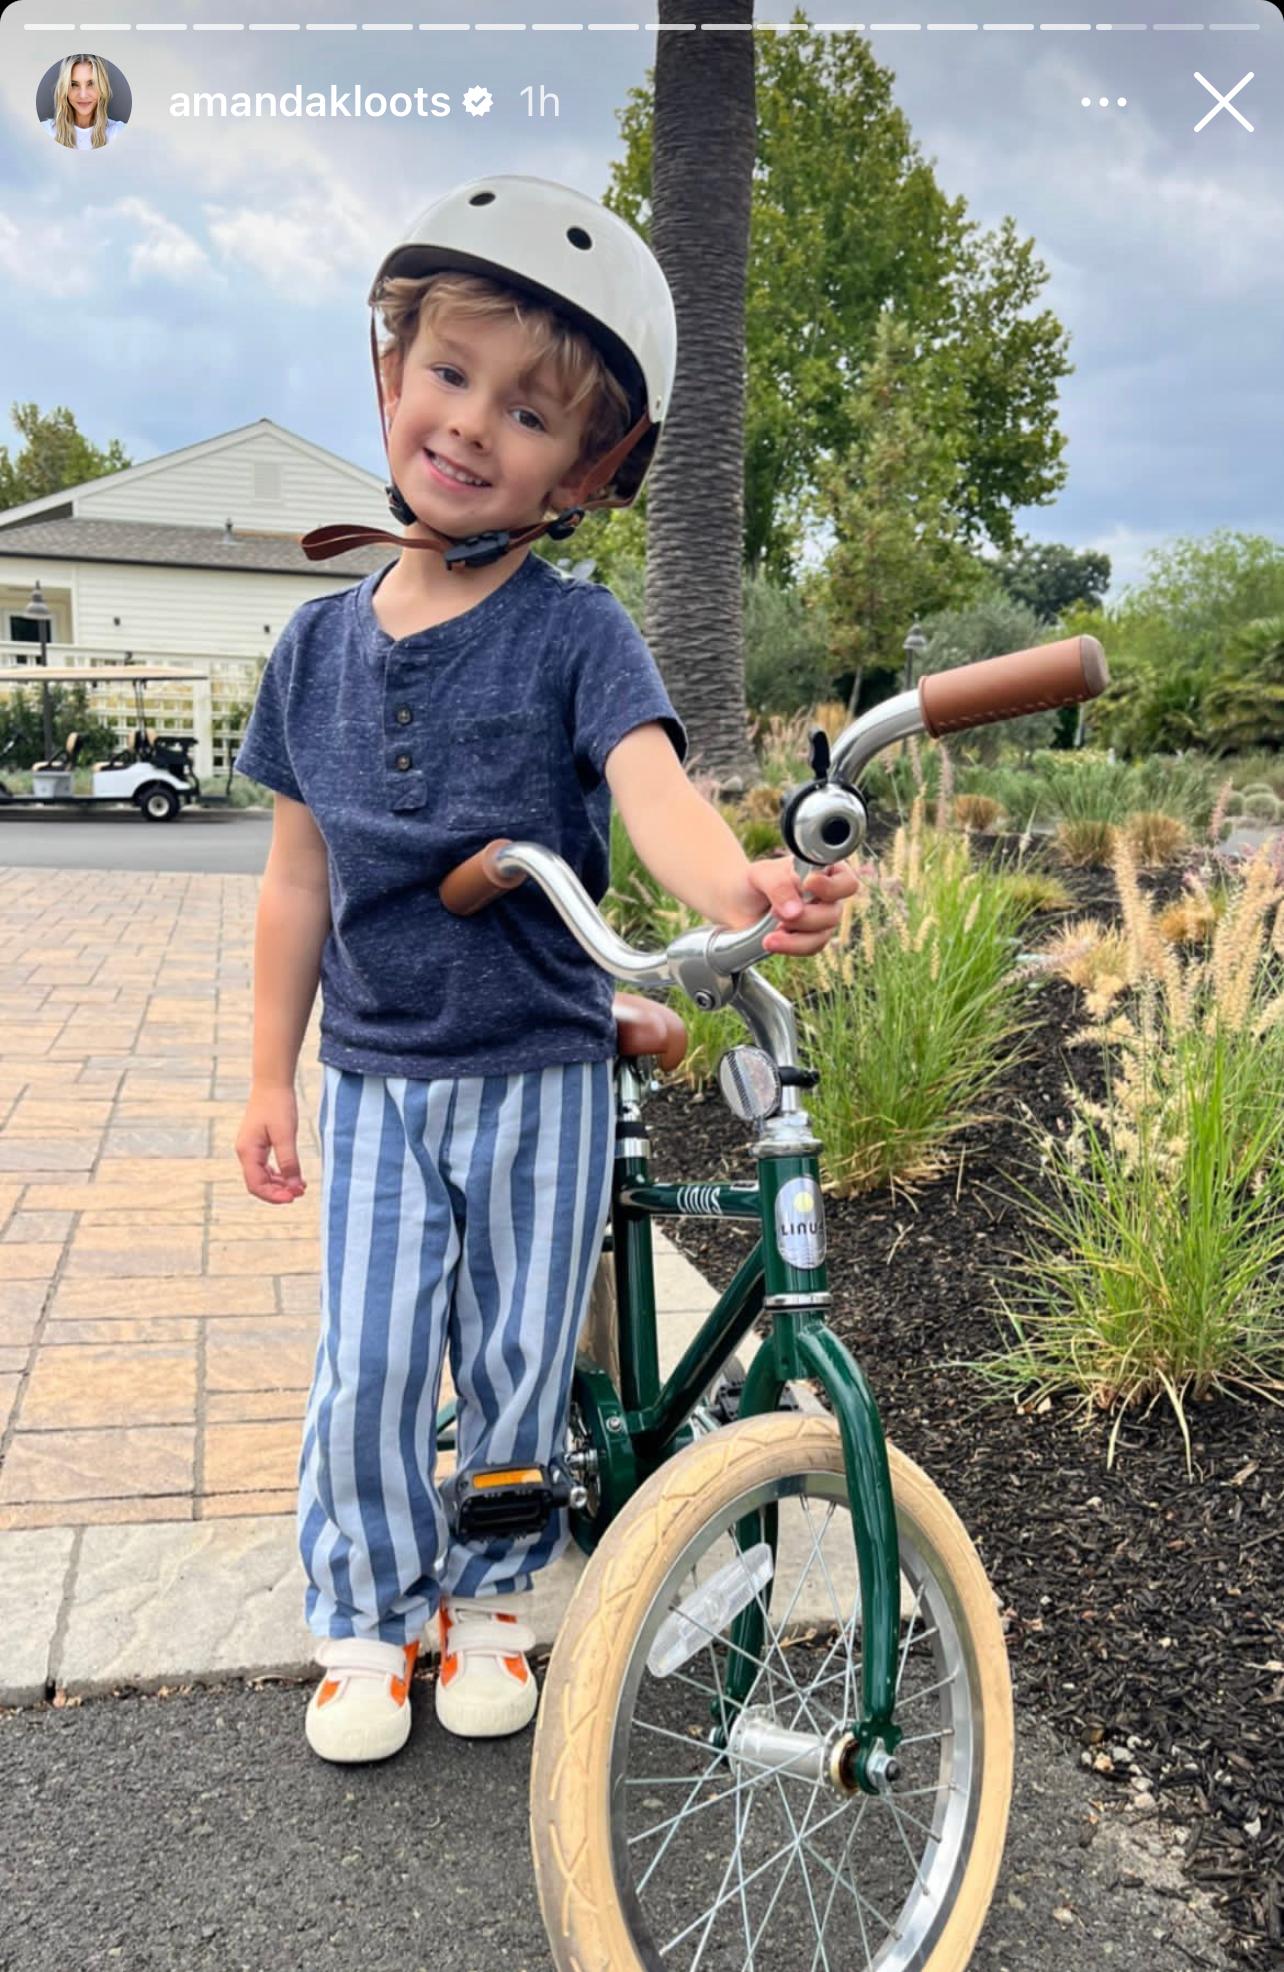 Amanda Kloots Calls Son 'A True Performer' As He Takes First Bike Ride